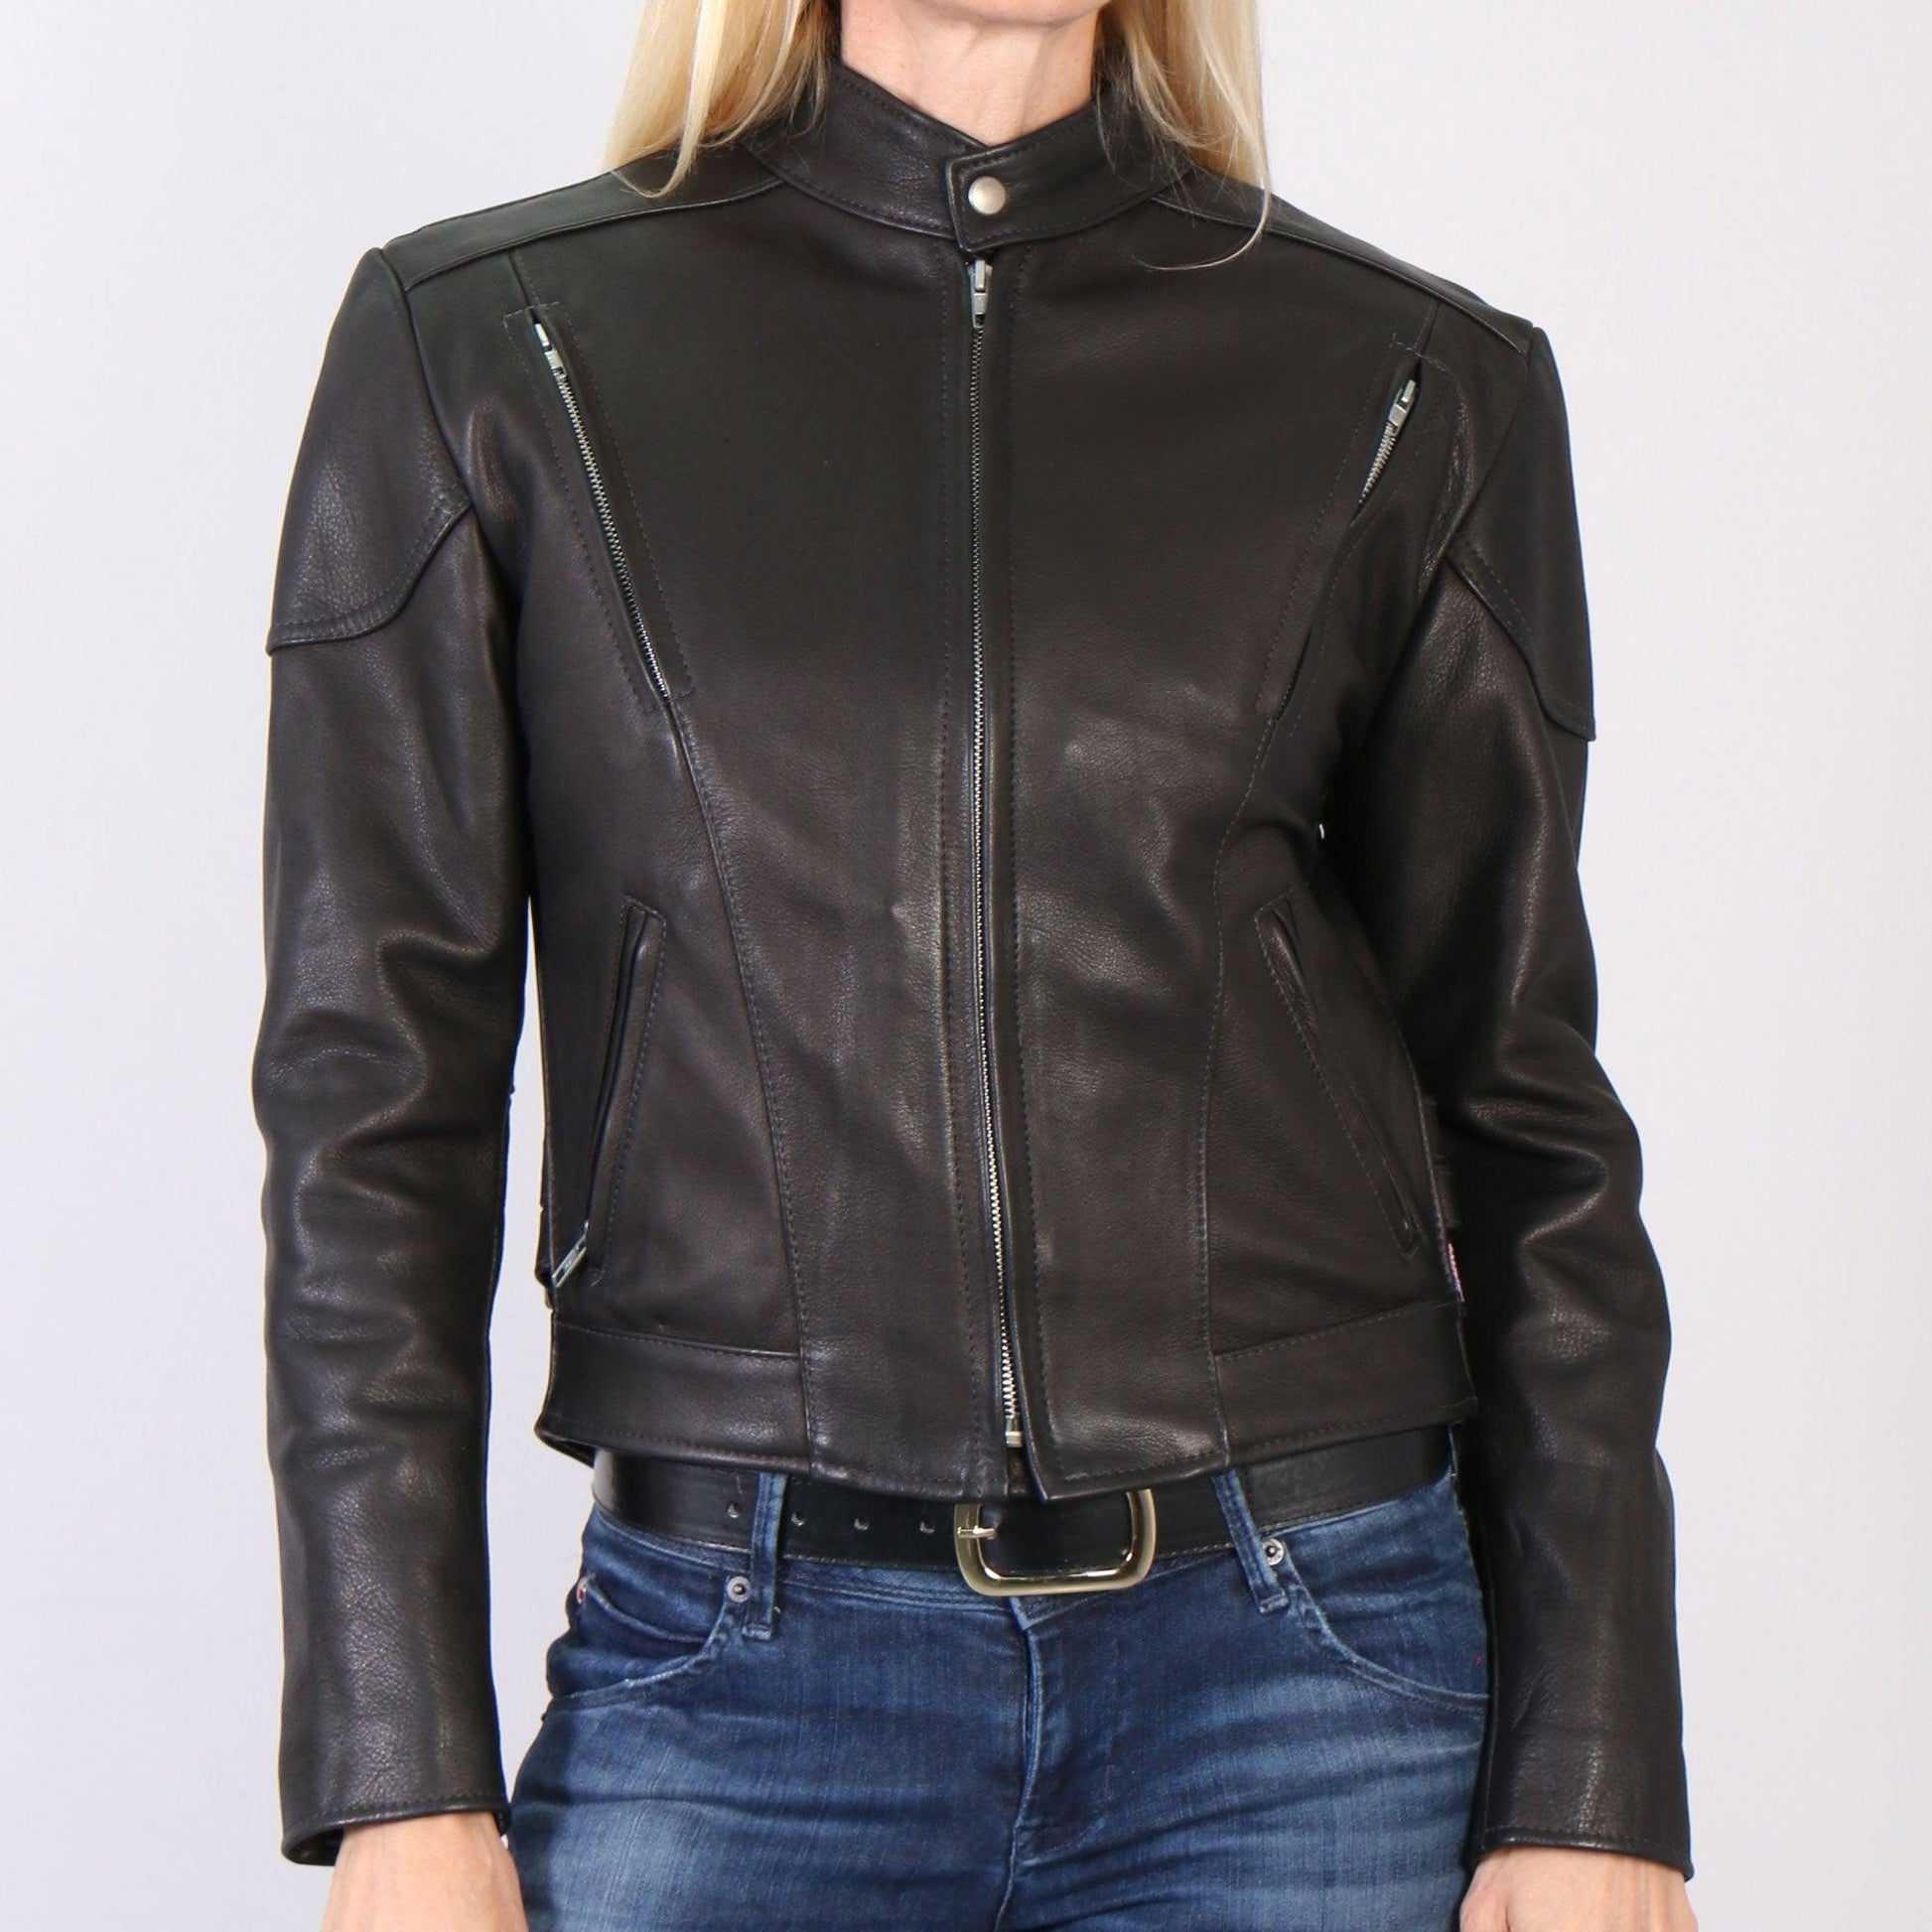 USA Made Ladies Vented Leather Jacket - Military Republic